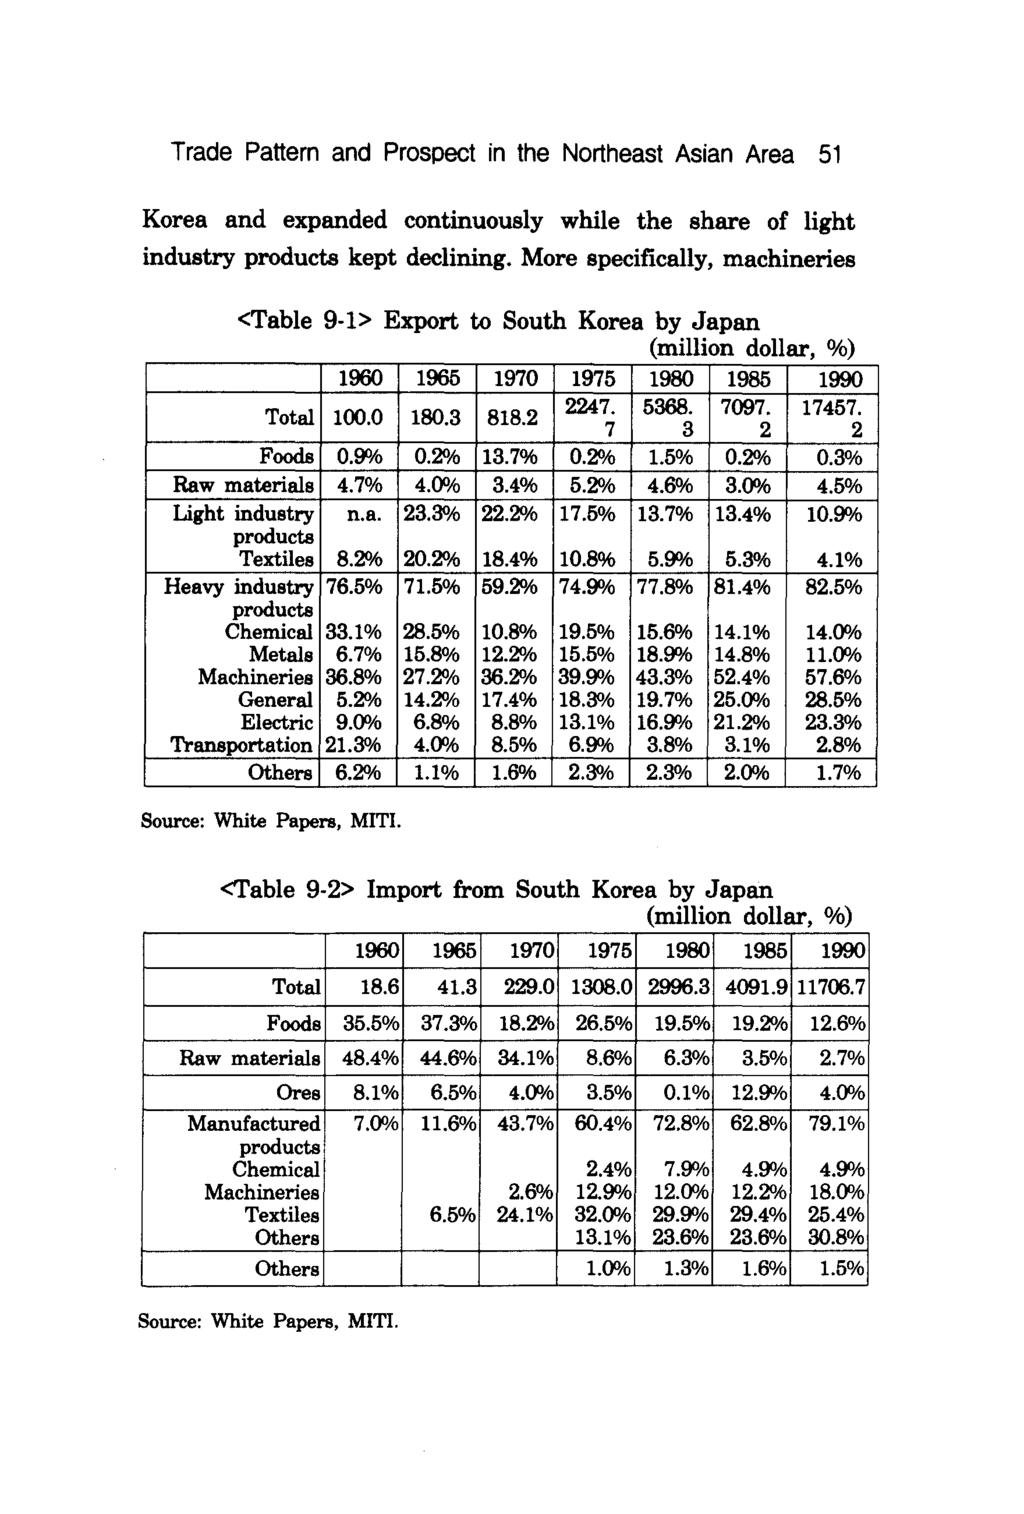 Trade Pattern and Prospect in the Northeast Asian Area 51 Korea and expanded continuously while the share of light industry products kept declining.